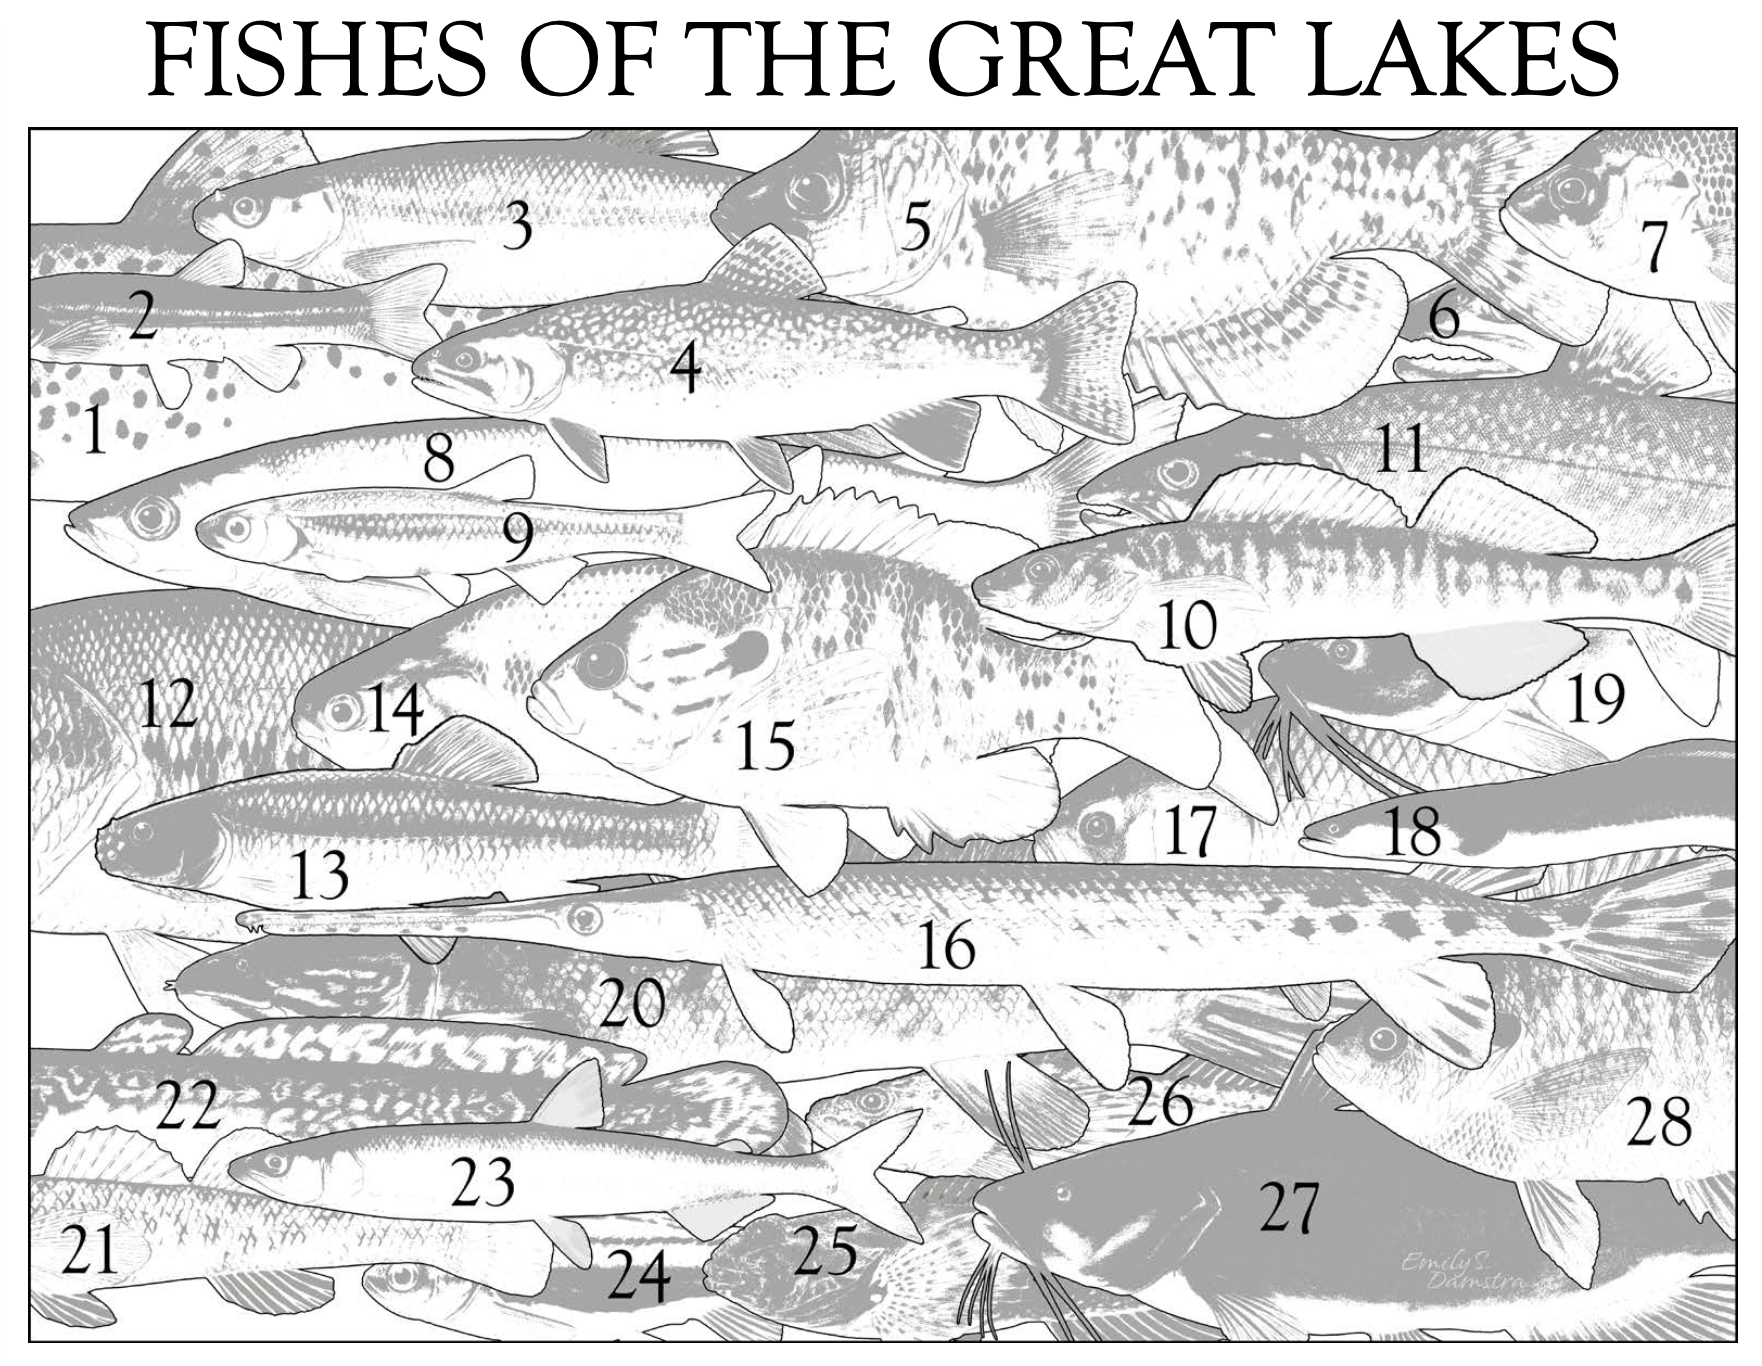 Great Lakes fishes puzzle map